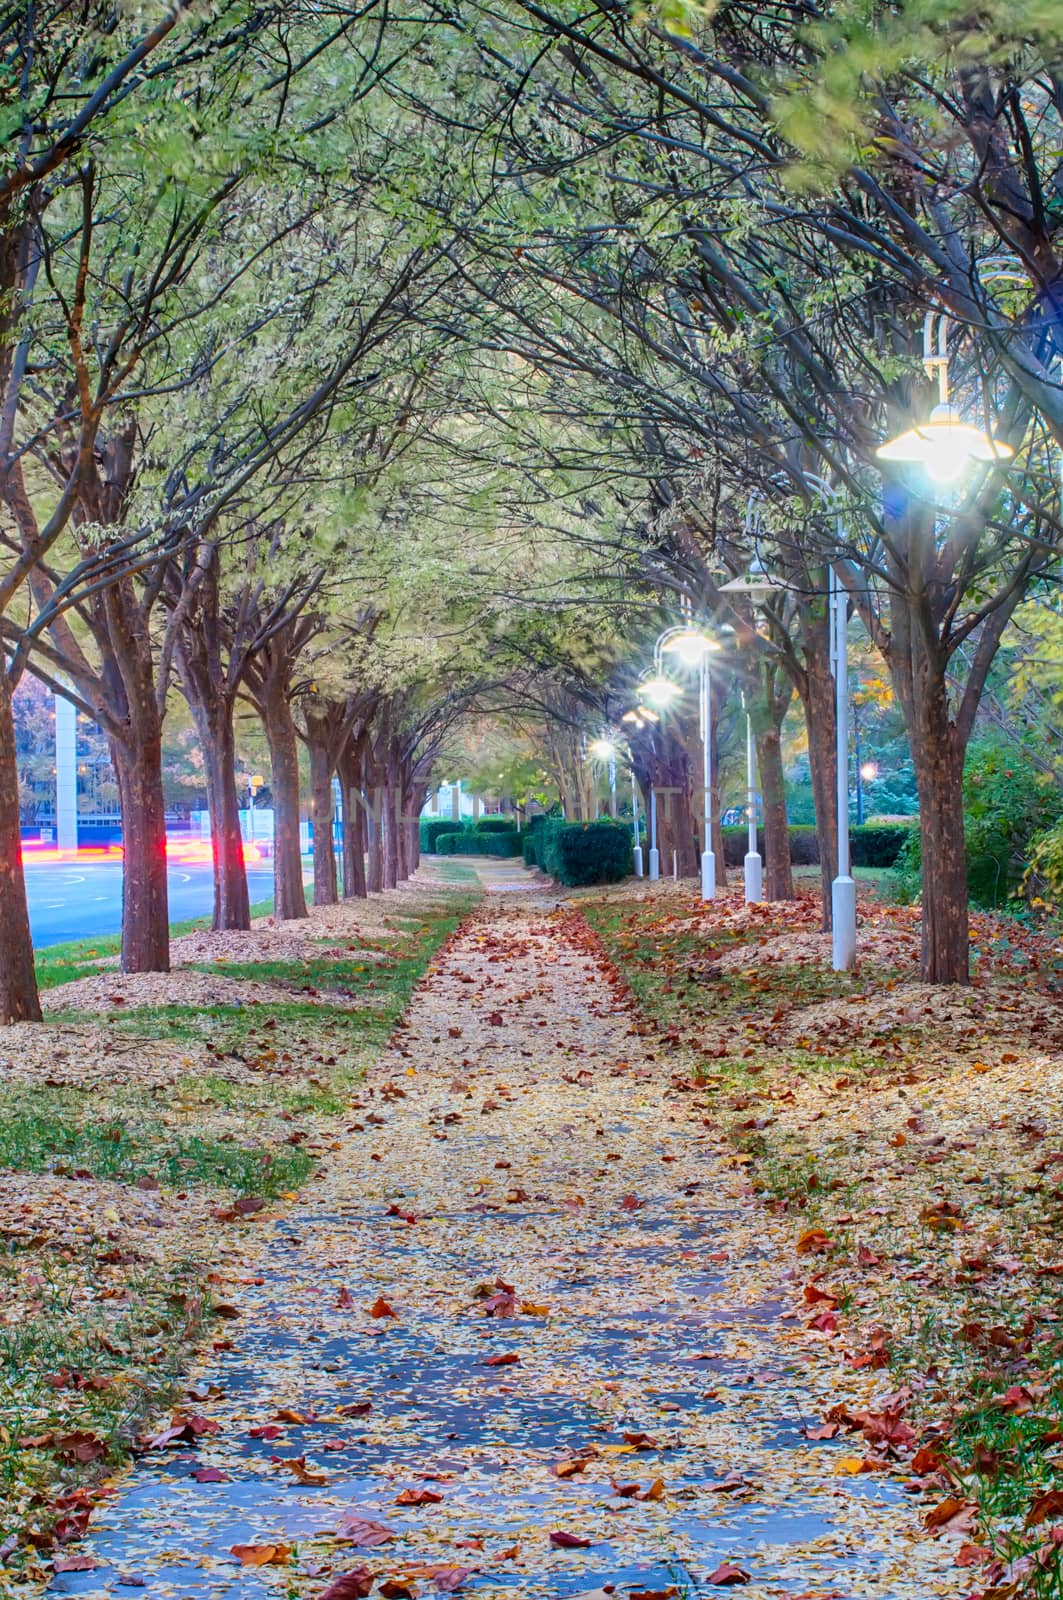 Autumnal alley in the park along the road by digidreamgrafix